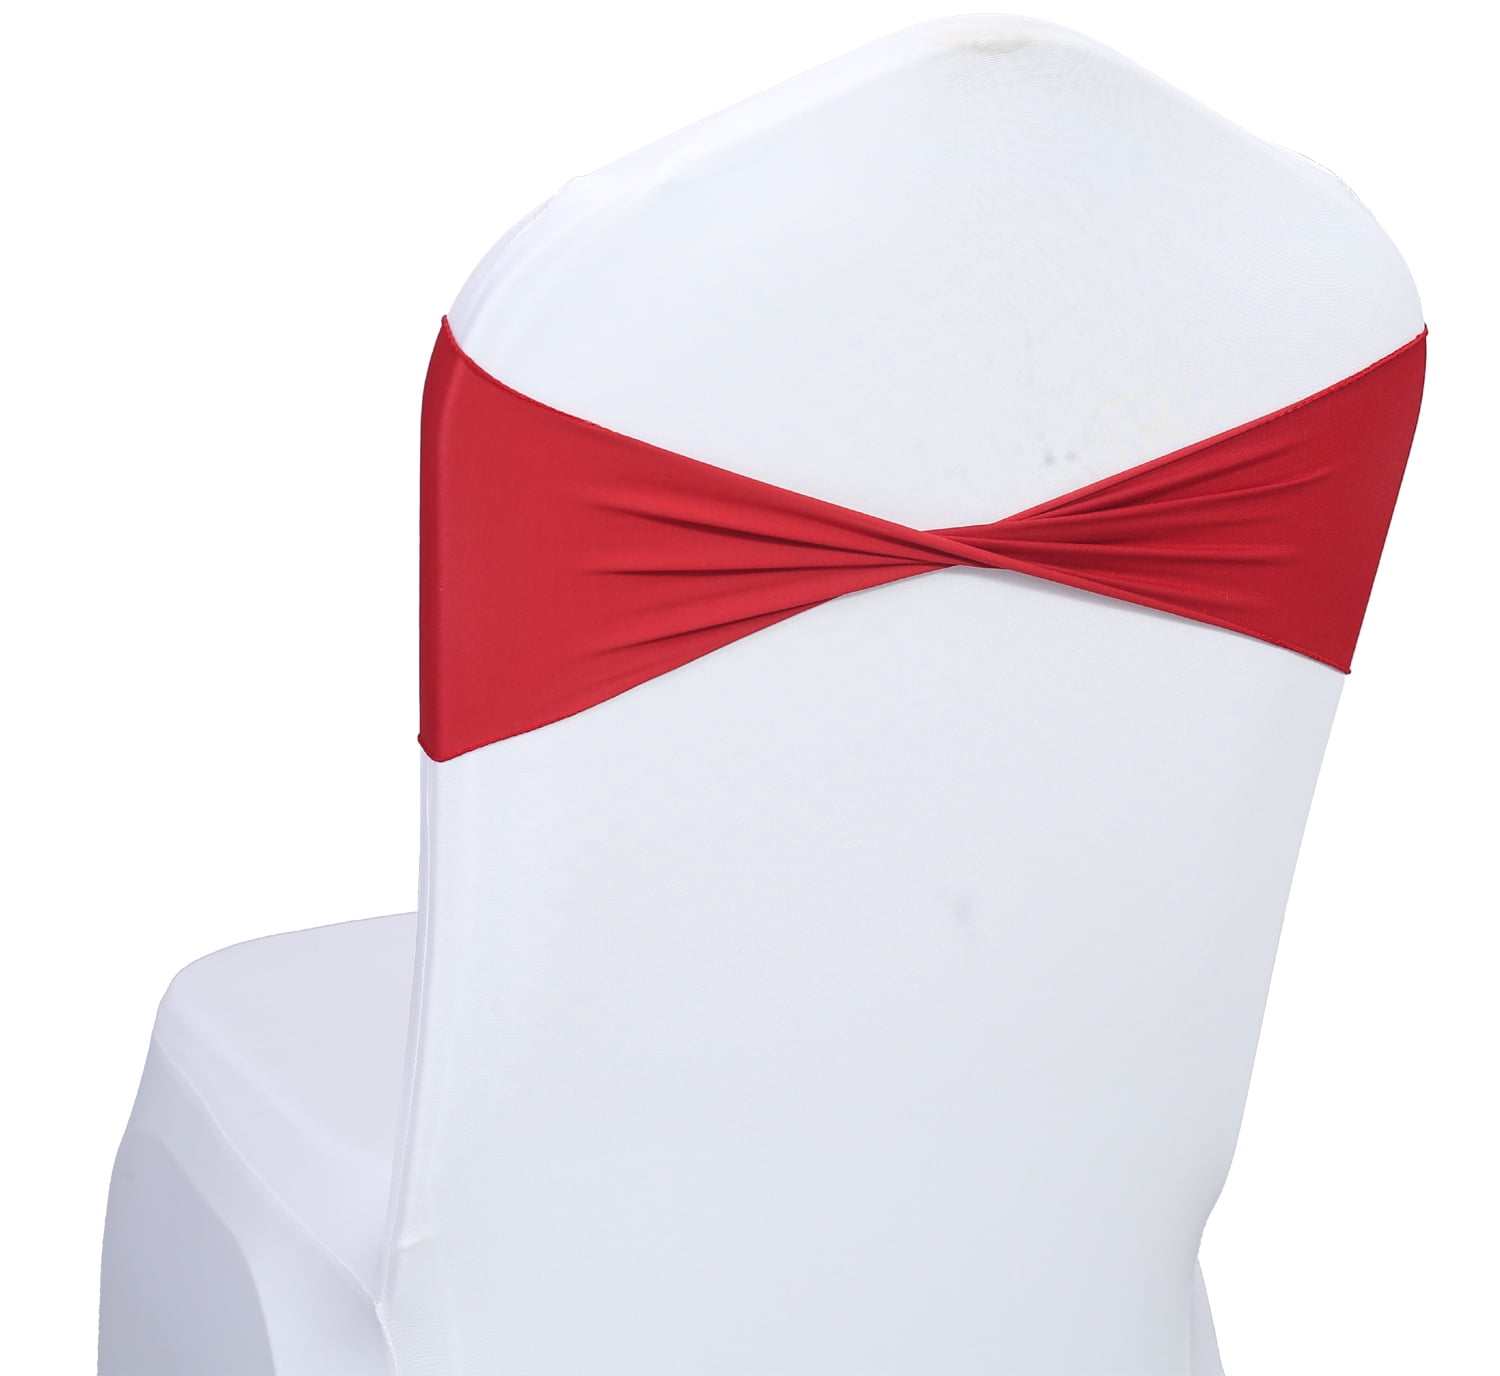 200PCS Spandex Stretch Wedding Chair Cover Sashes Bow Band Party Banquet Decor 